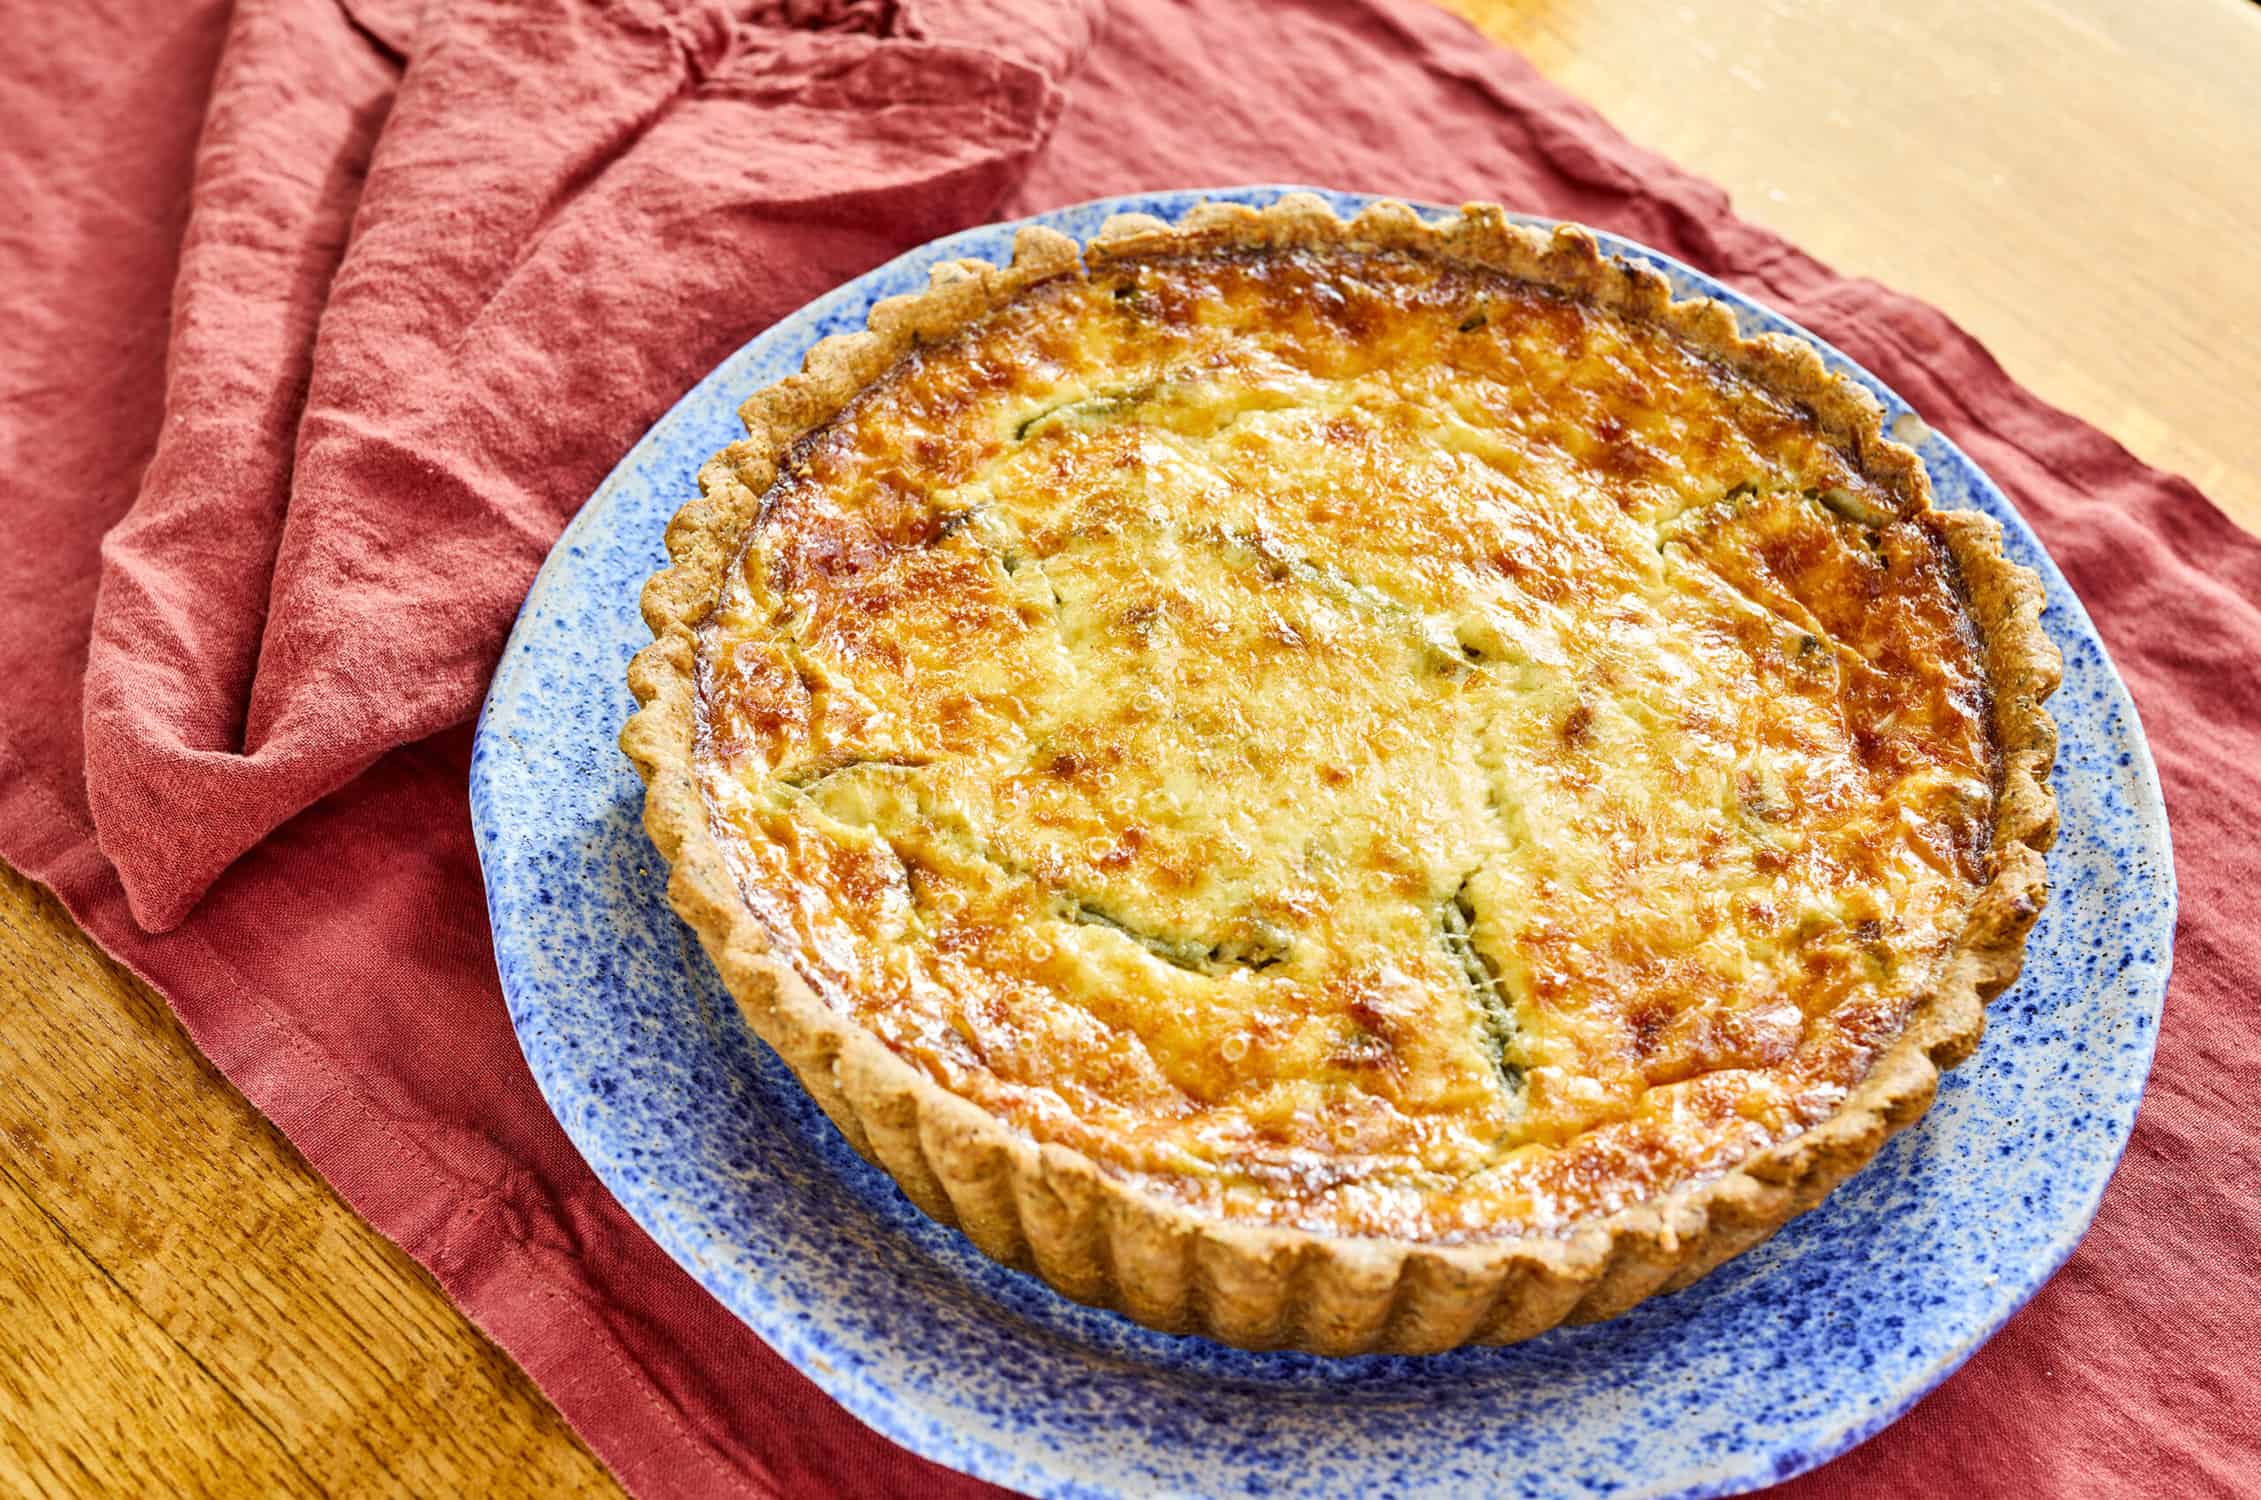 a perfectly baked quiche made with fresh farmer's market veggies